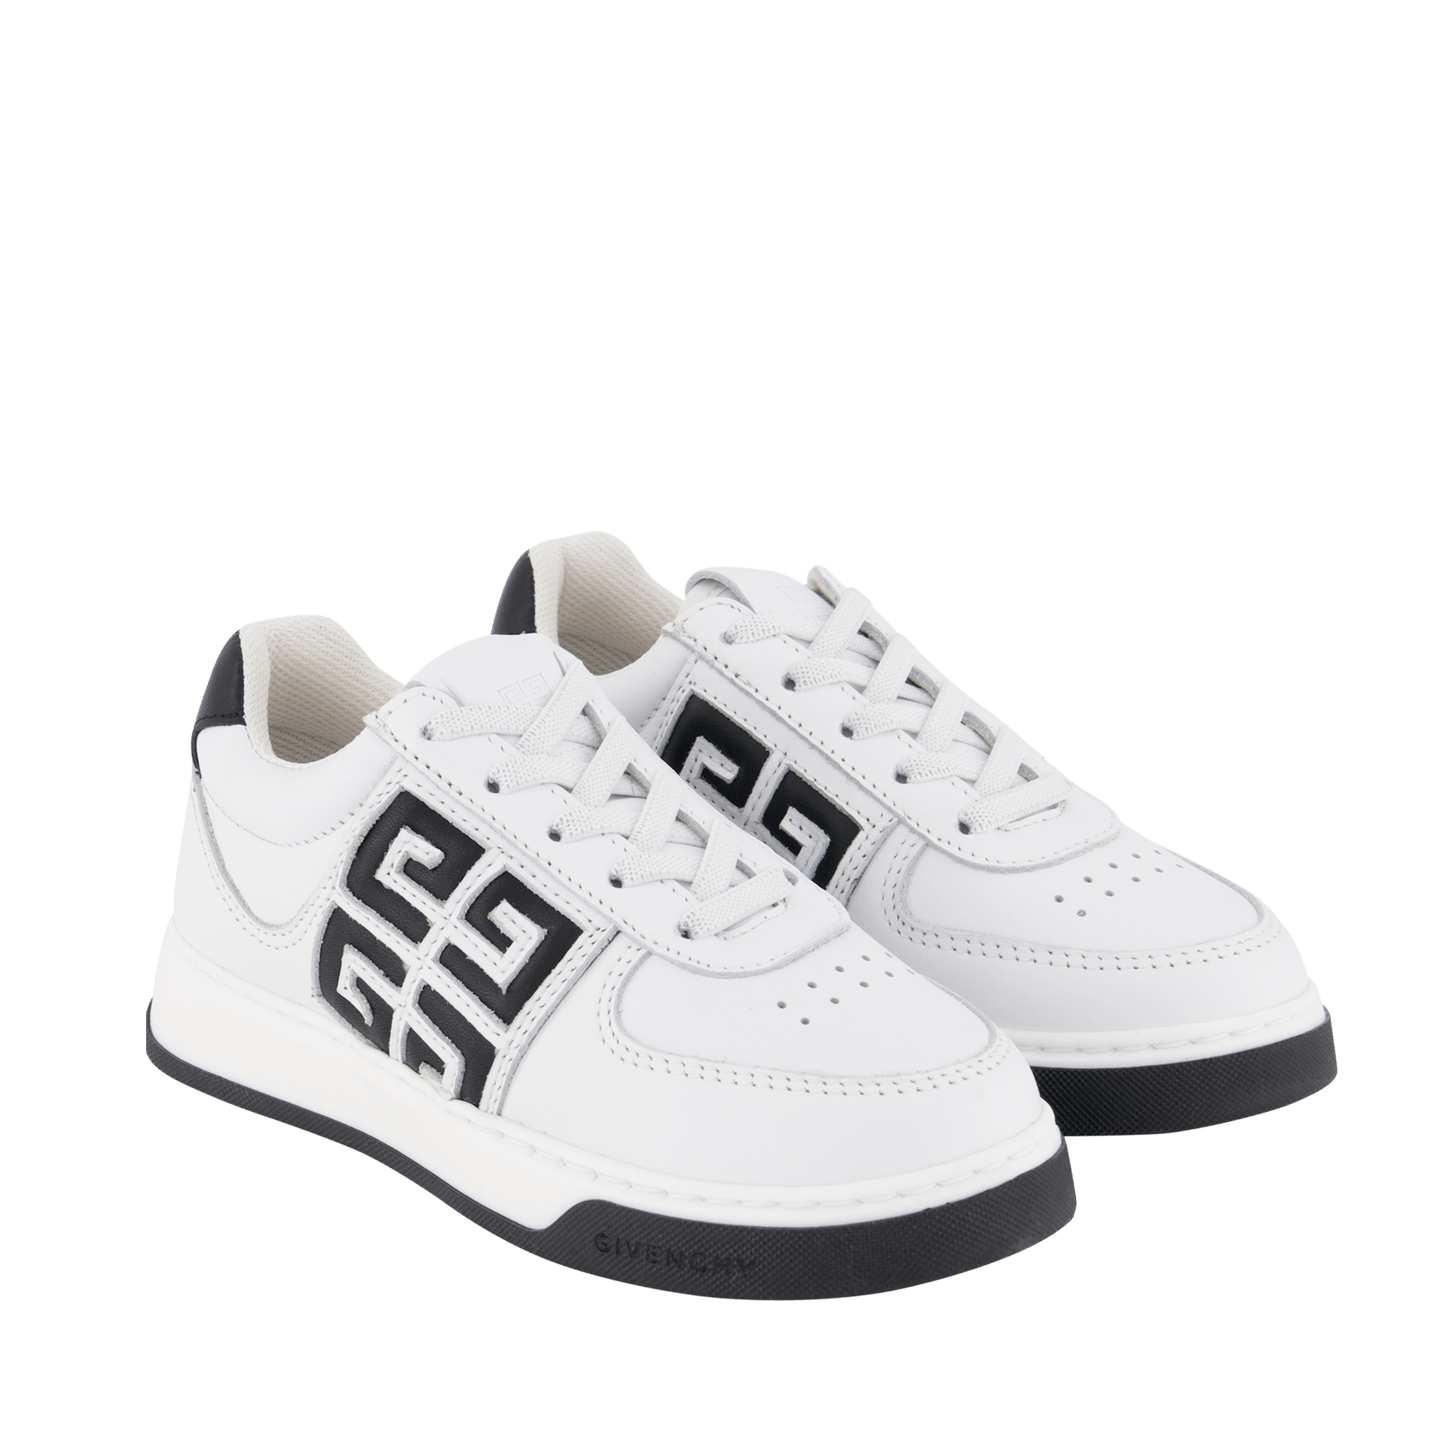 Givenchy Kinder Unisex Sneakers Wit 27